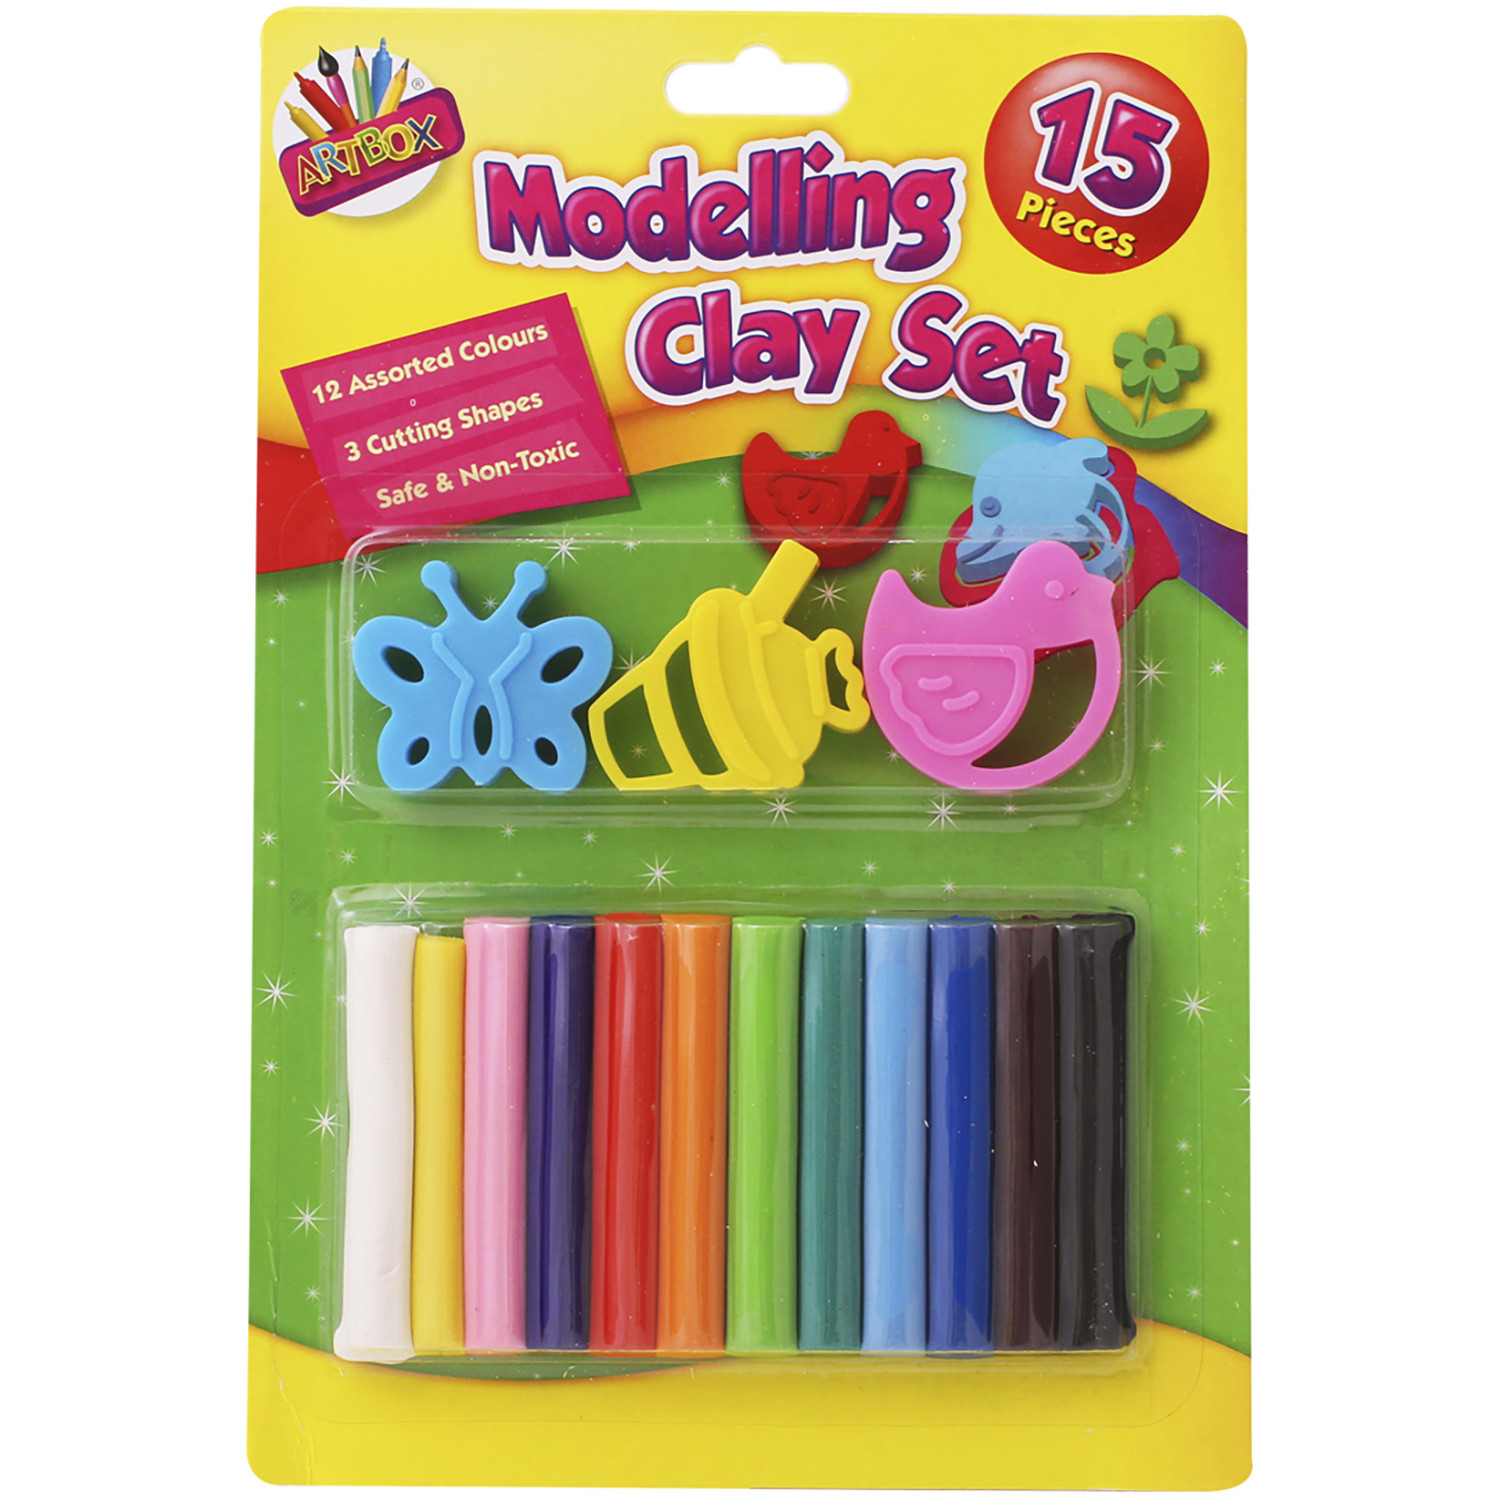 15 Piece Modelling Clay Set Image 3